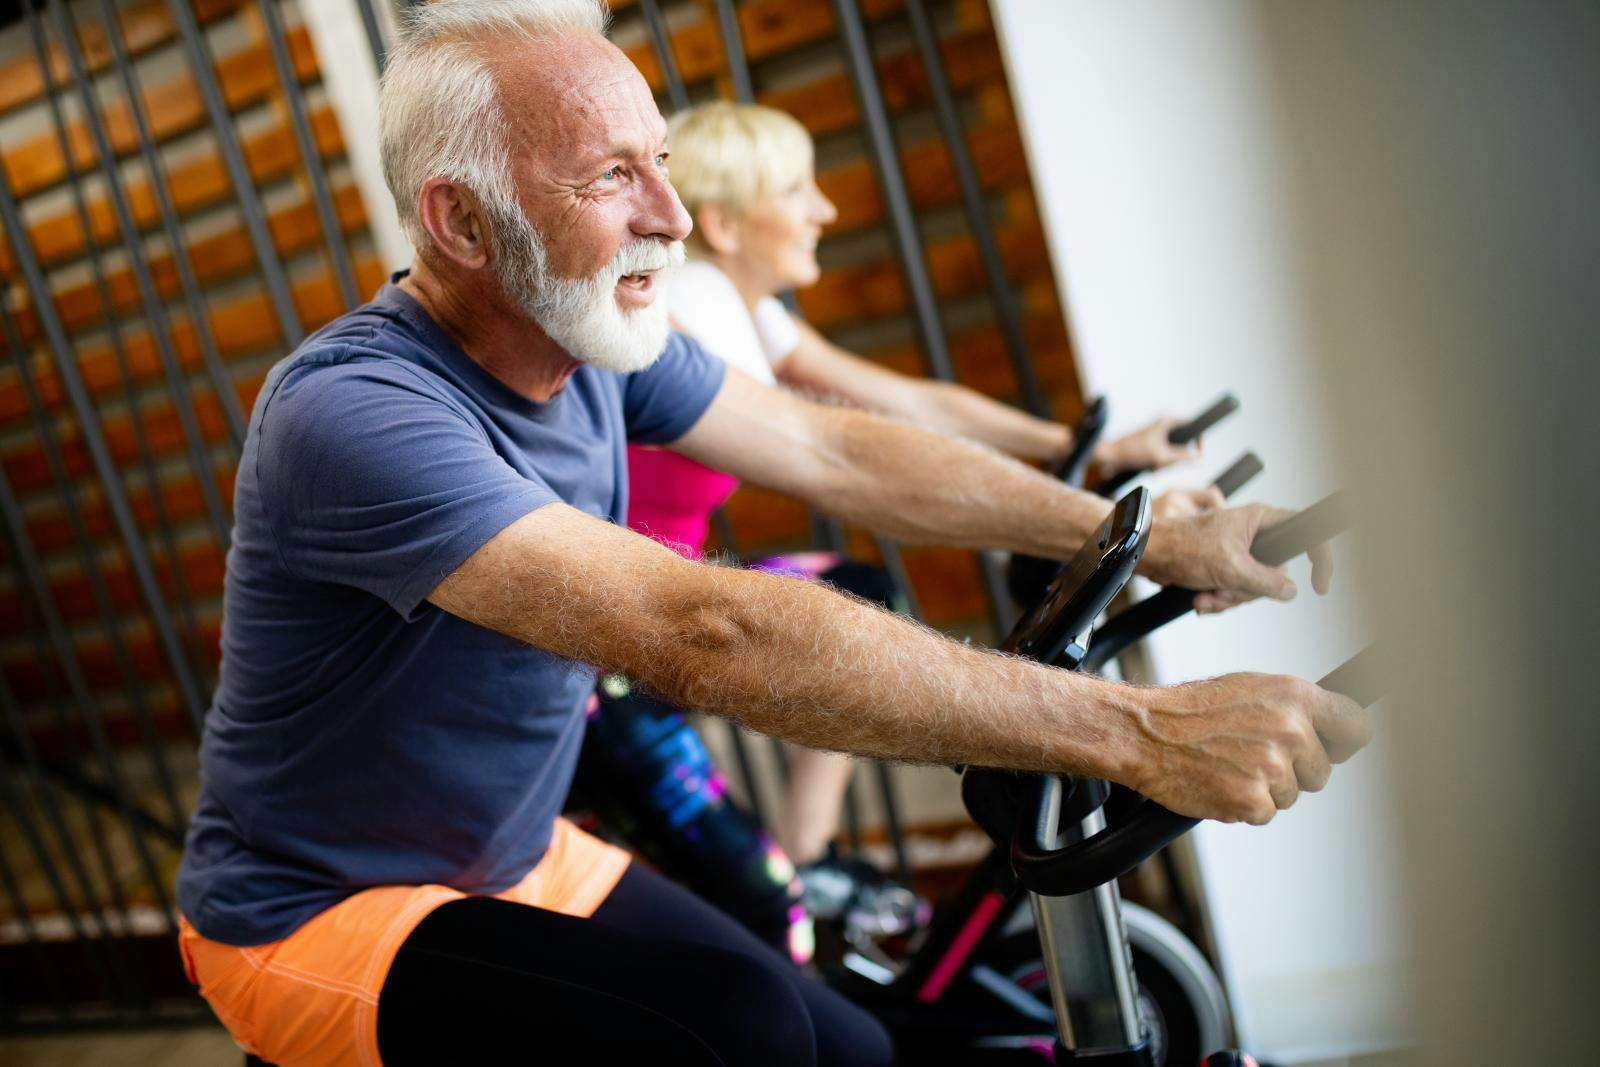 Exercise Can Benefit Patients Undergoing Treatment for Metastatic Colon Cancer